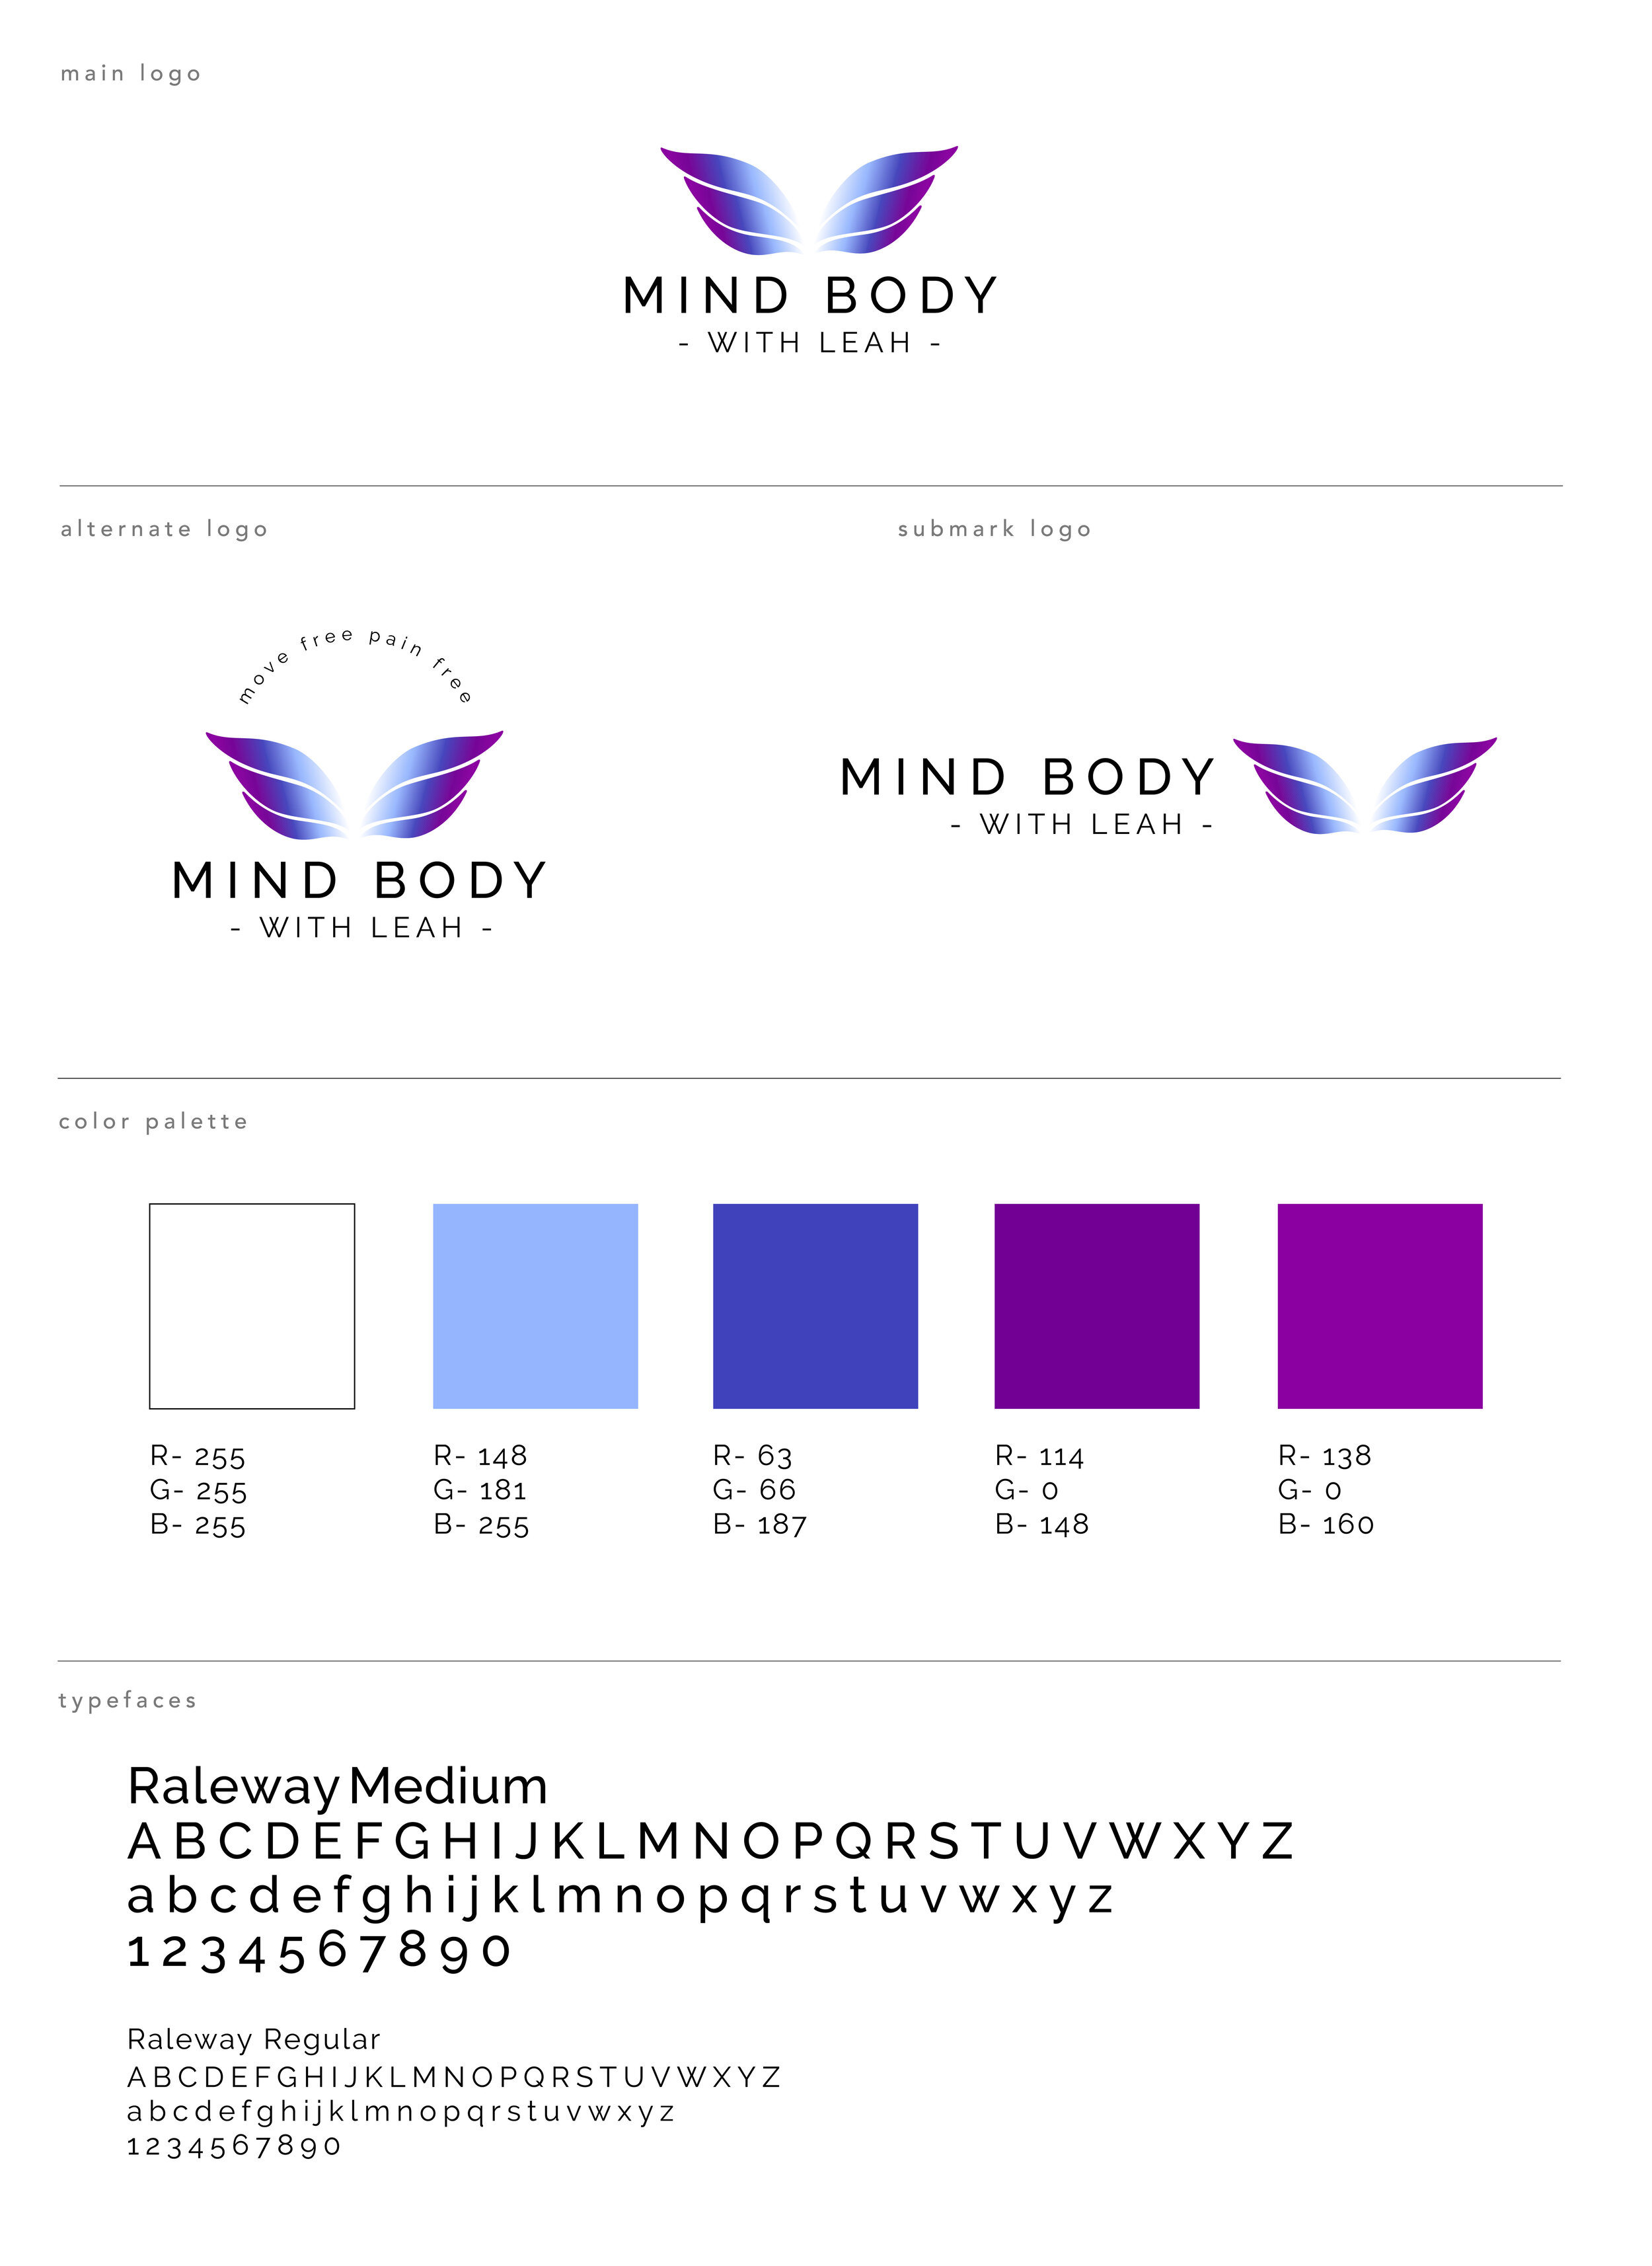 Mind Body with Leah_Final_brand style guide.jpg